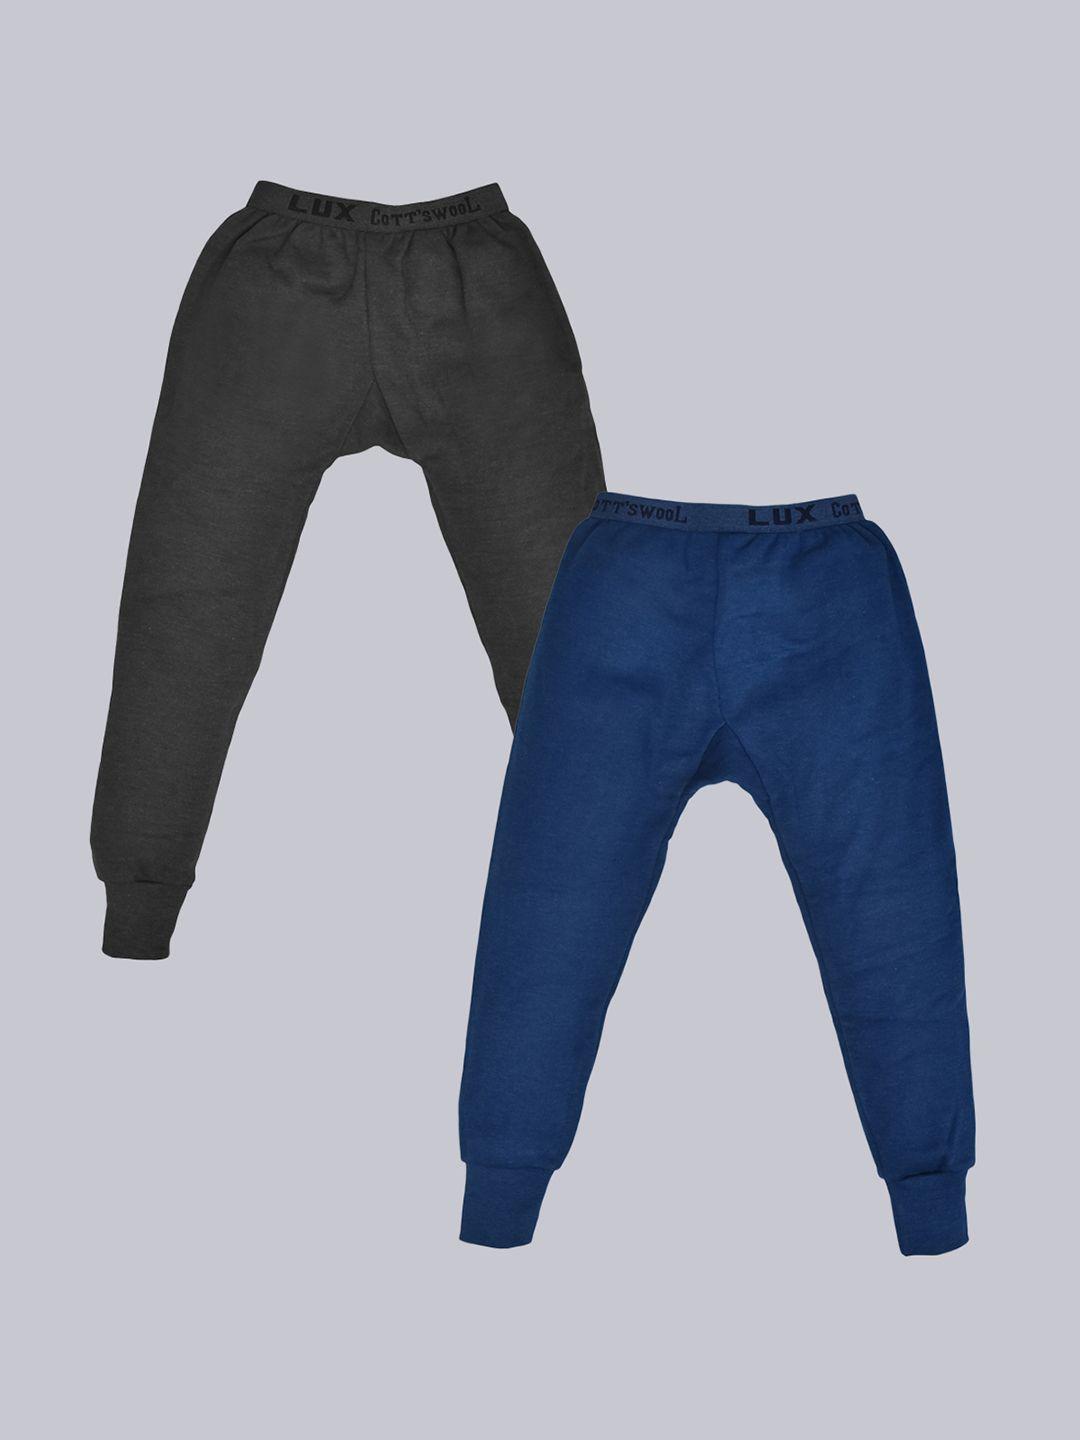 lux cottswool boys pack of 2 solid thermal bottoms